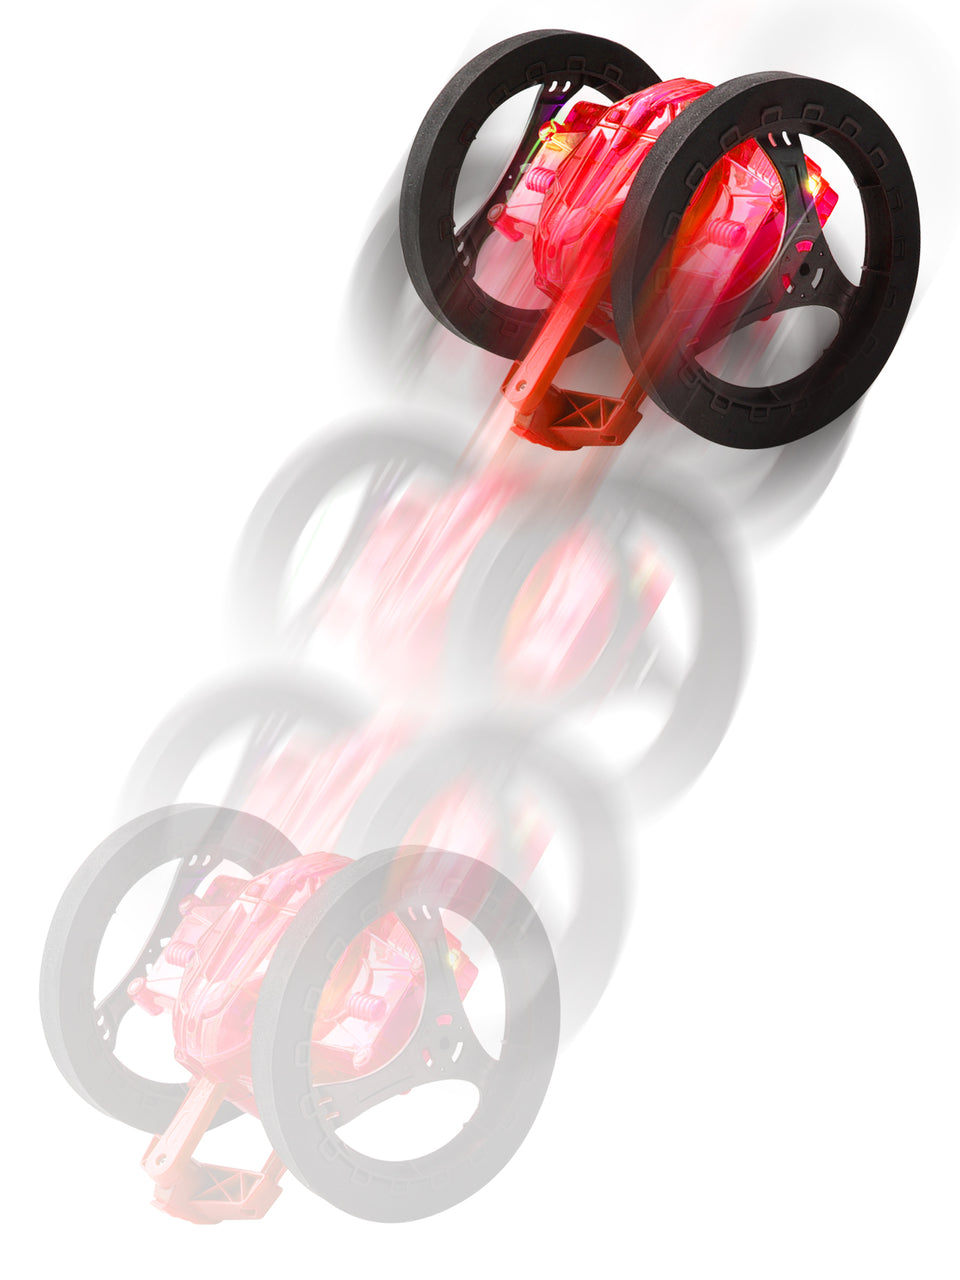 Turbo Twister Catapult RC RED